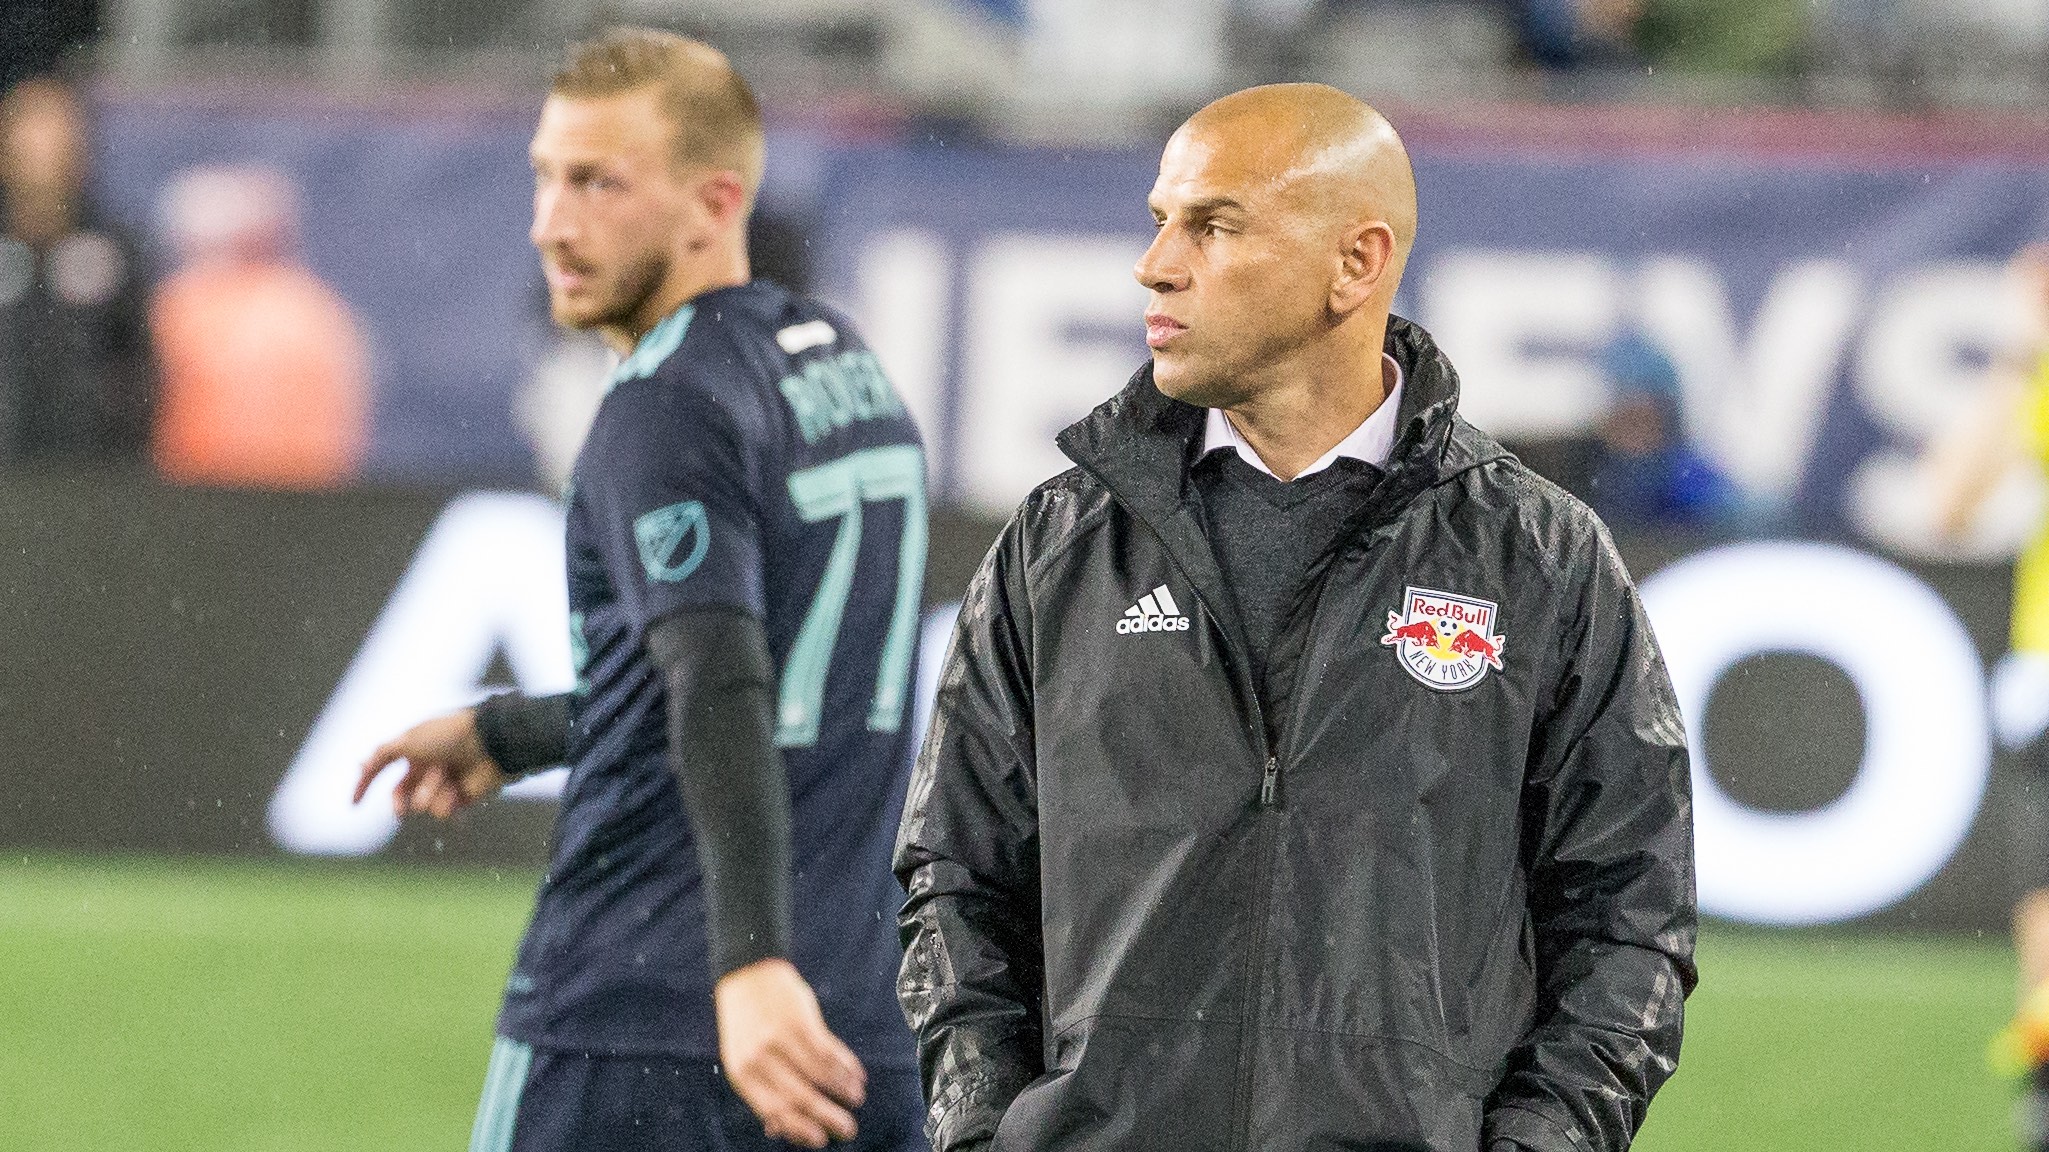 New Red Bulls part ways with head coach -